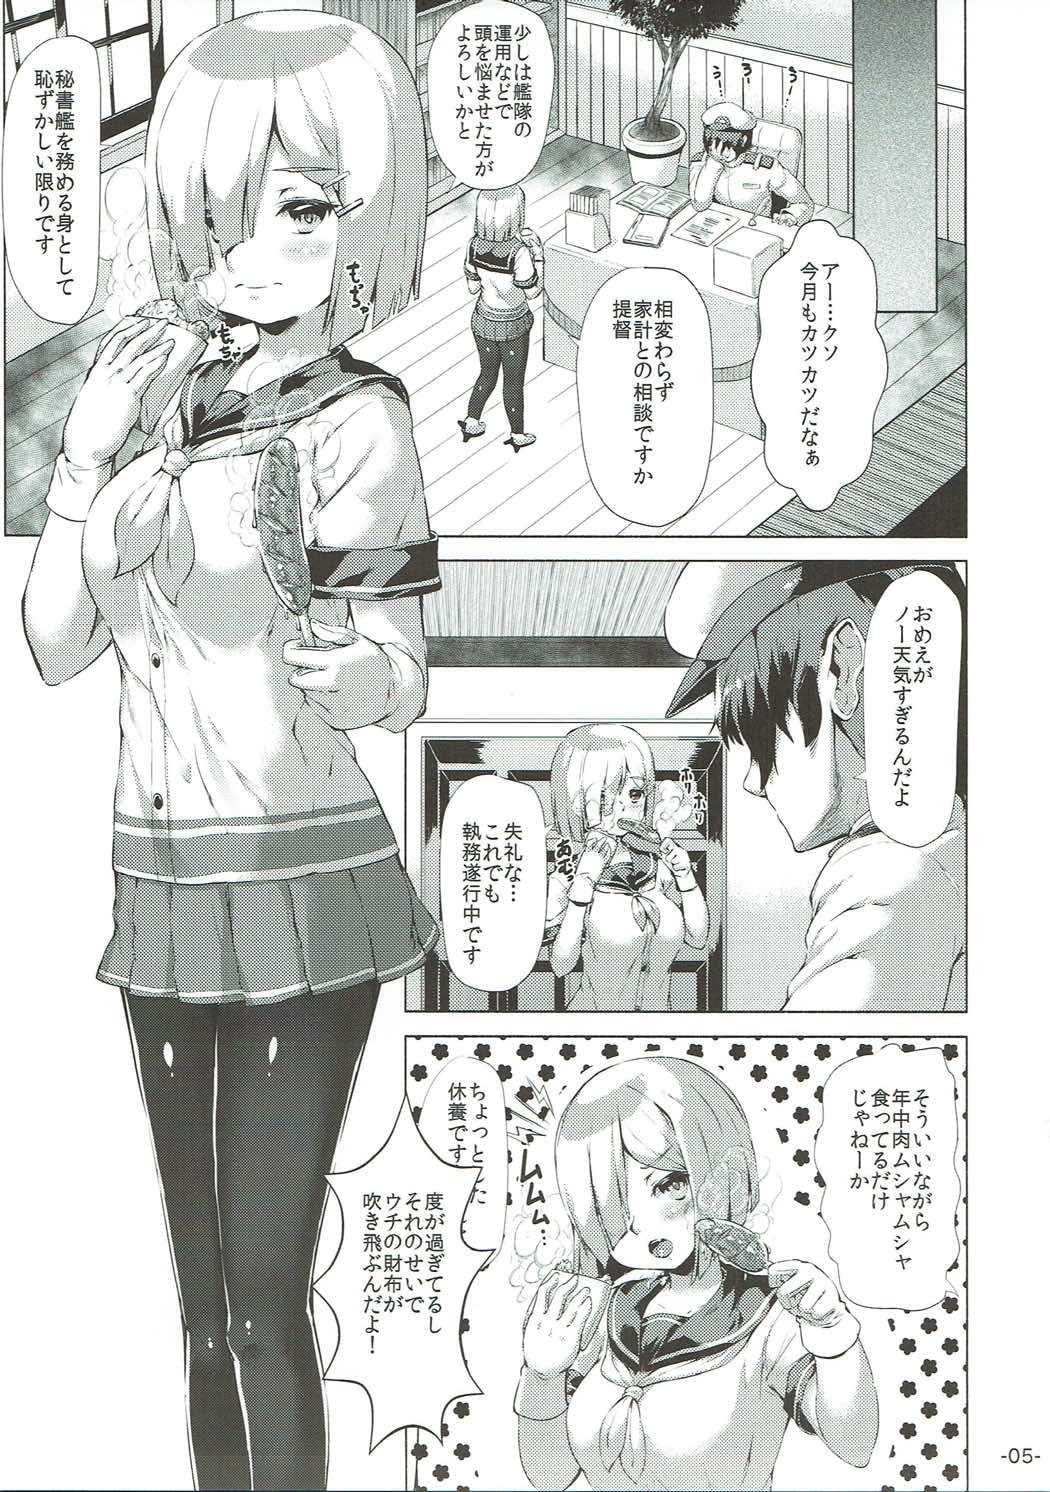 Old Vs Young Hamakaze Tabehoudai. - Kantai collection Sixtynine - Page 4